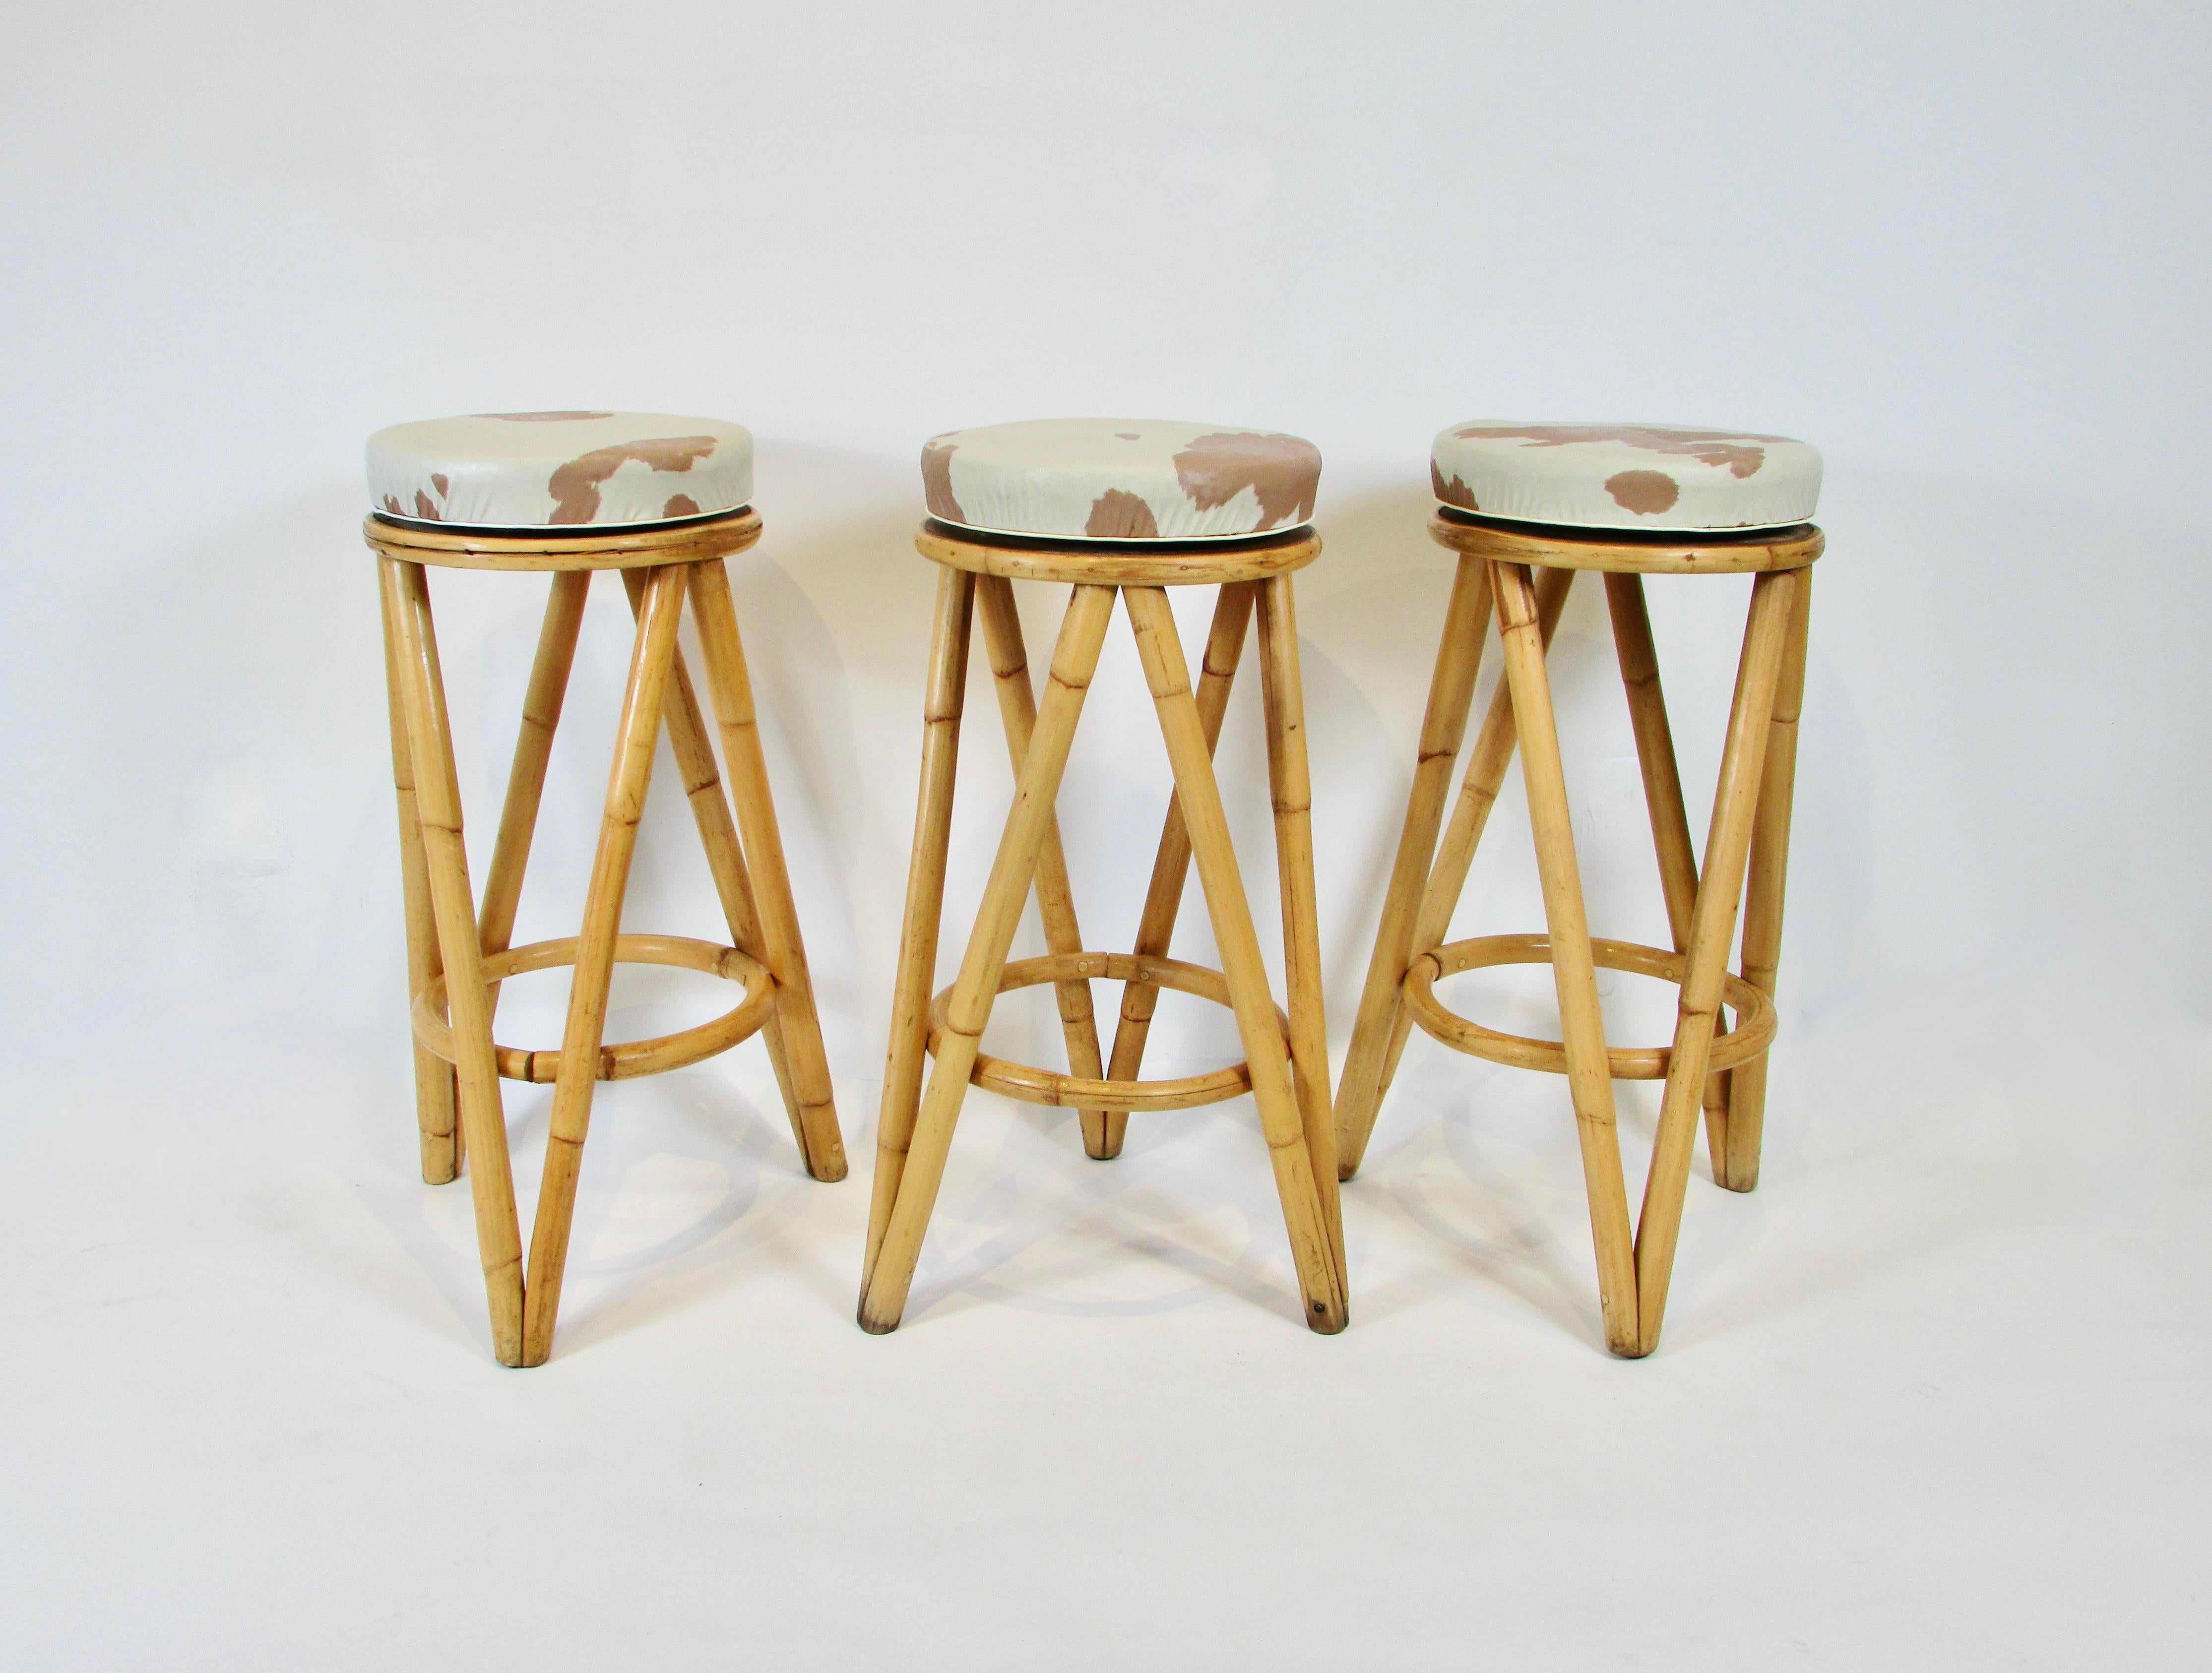 Set of four 1950s bamboo or rattan bar stools . Three triangulated legs support round swivel tops . Seats are covered in what looks like original faux cowhide vinyl . Good condition especially considering age but some wear on seats . Scuffs to